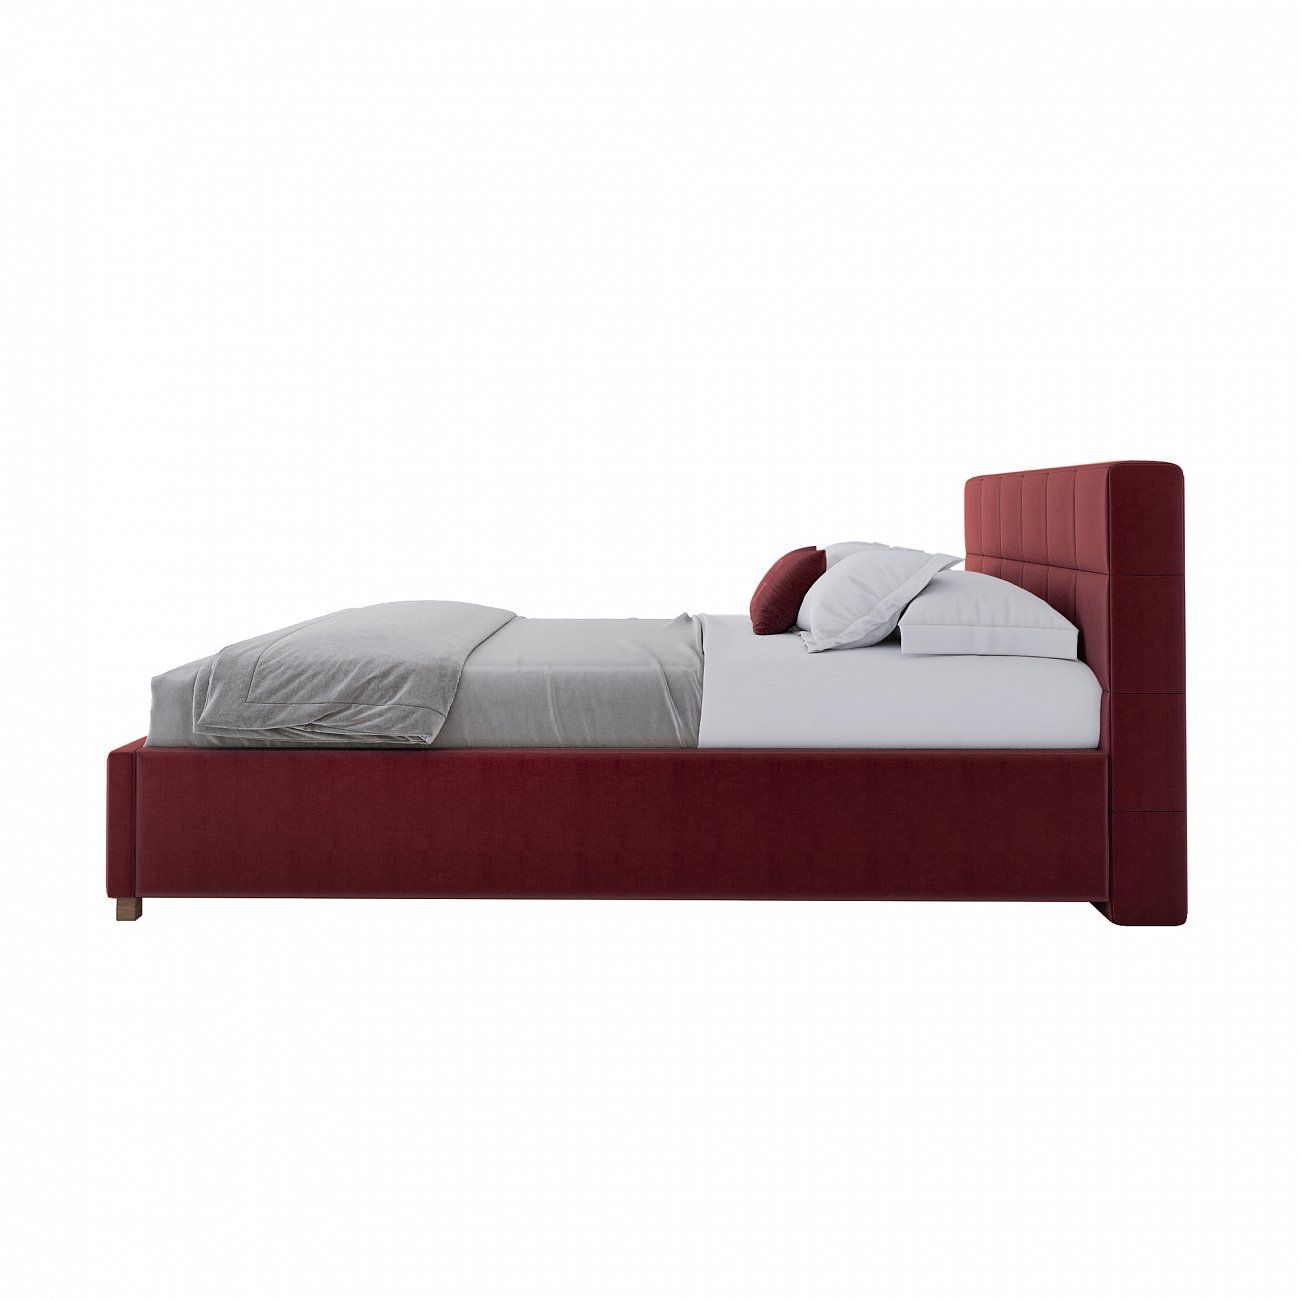 Teenage bed with upholstered headboard 140x200 cm red Wales